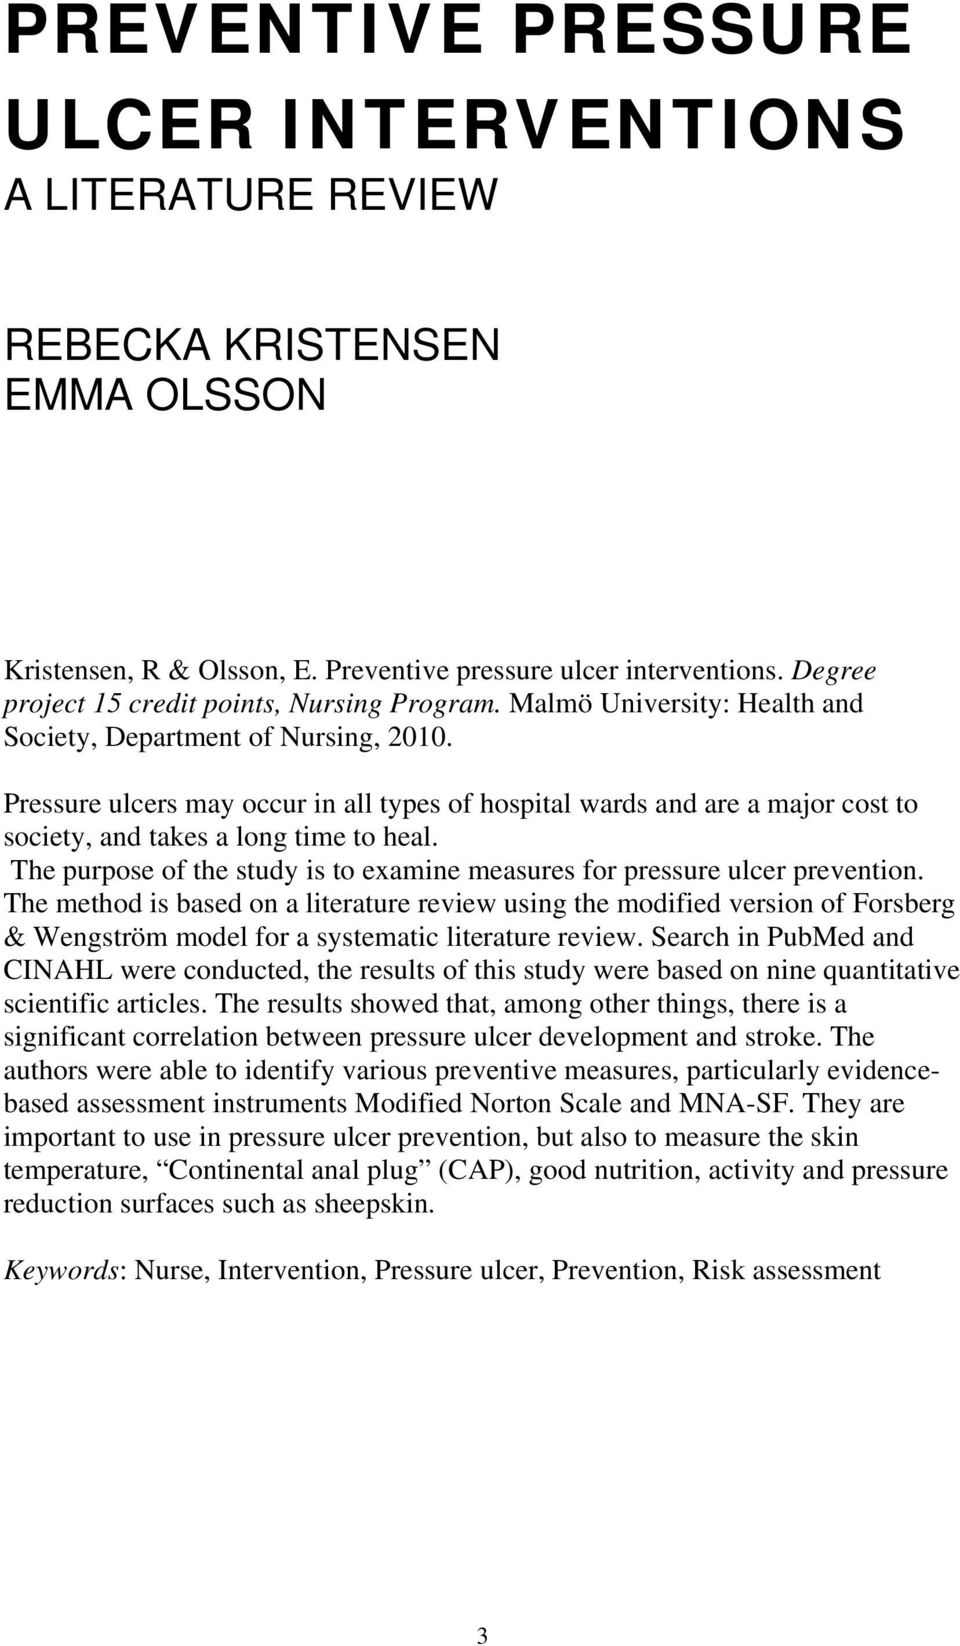 Pressure ulcers may occur in all types of hospital wards and are a major cost to society, and takes a long time to heal. The purpose of the study is to examine measures for pressure ulcer prevention.